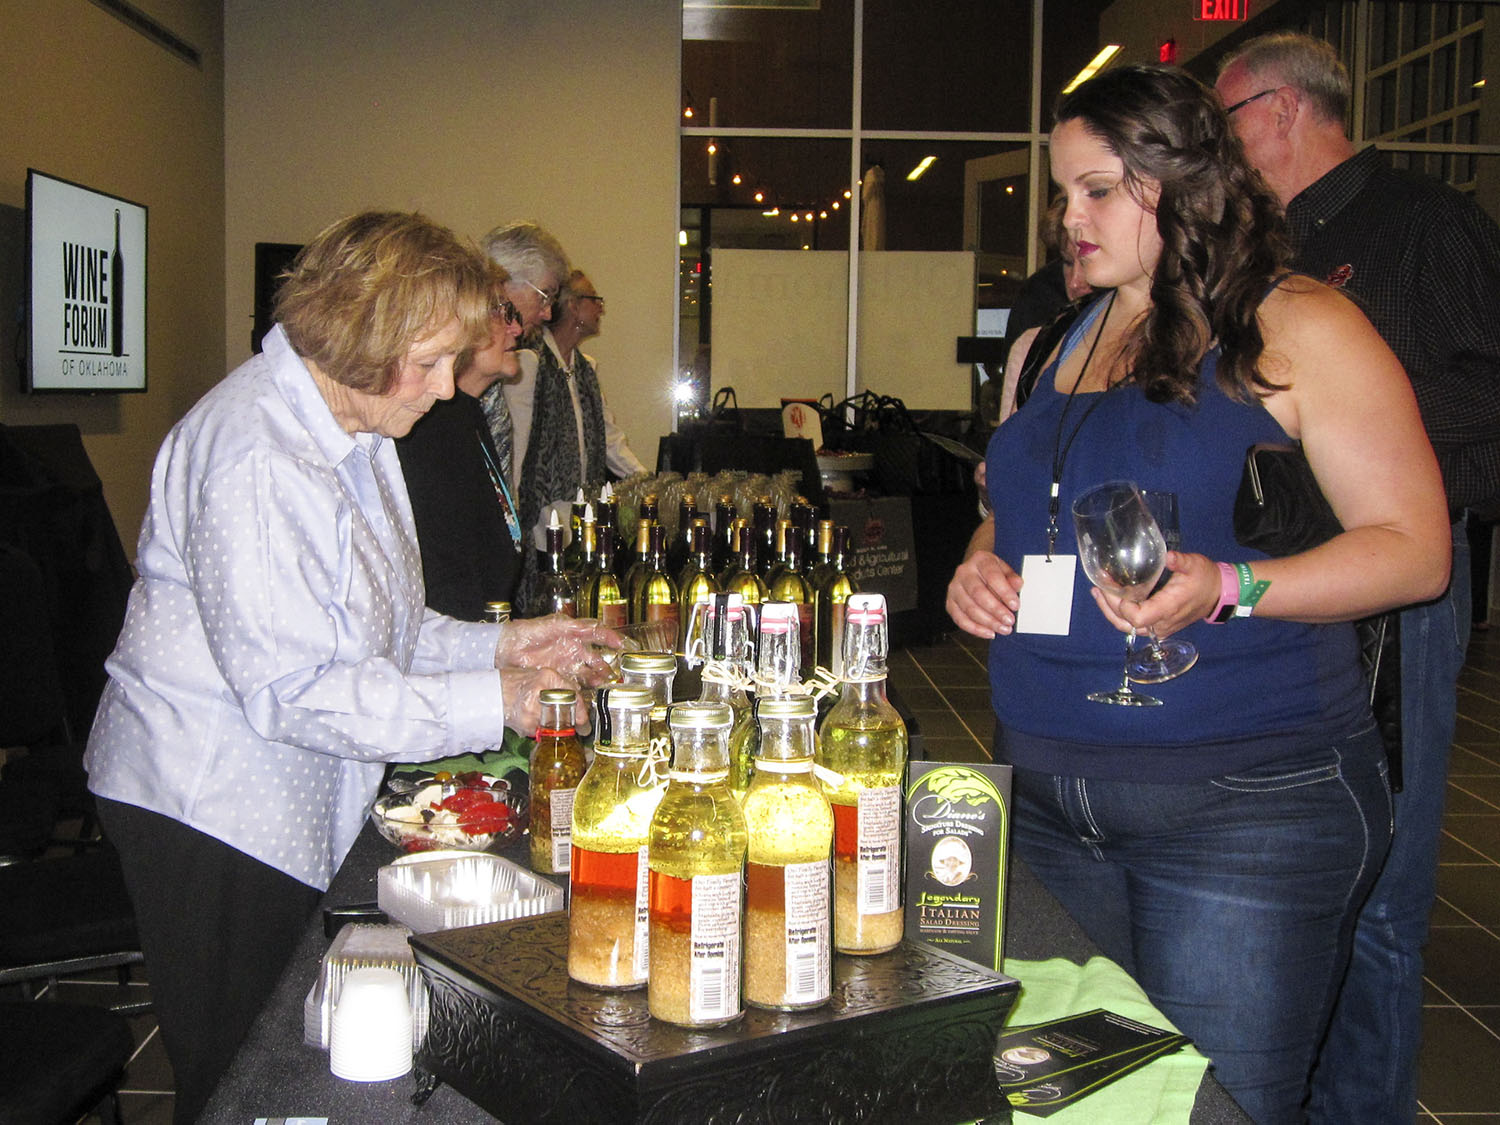 Made in Oklahoma products featured at Wine Forum of Oklahoma